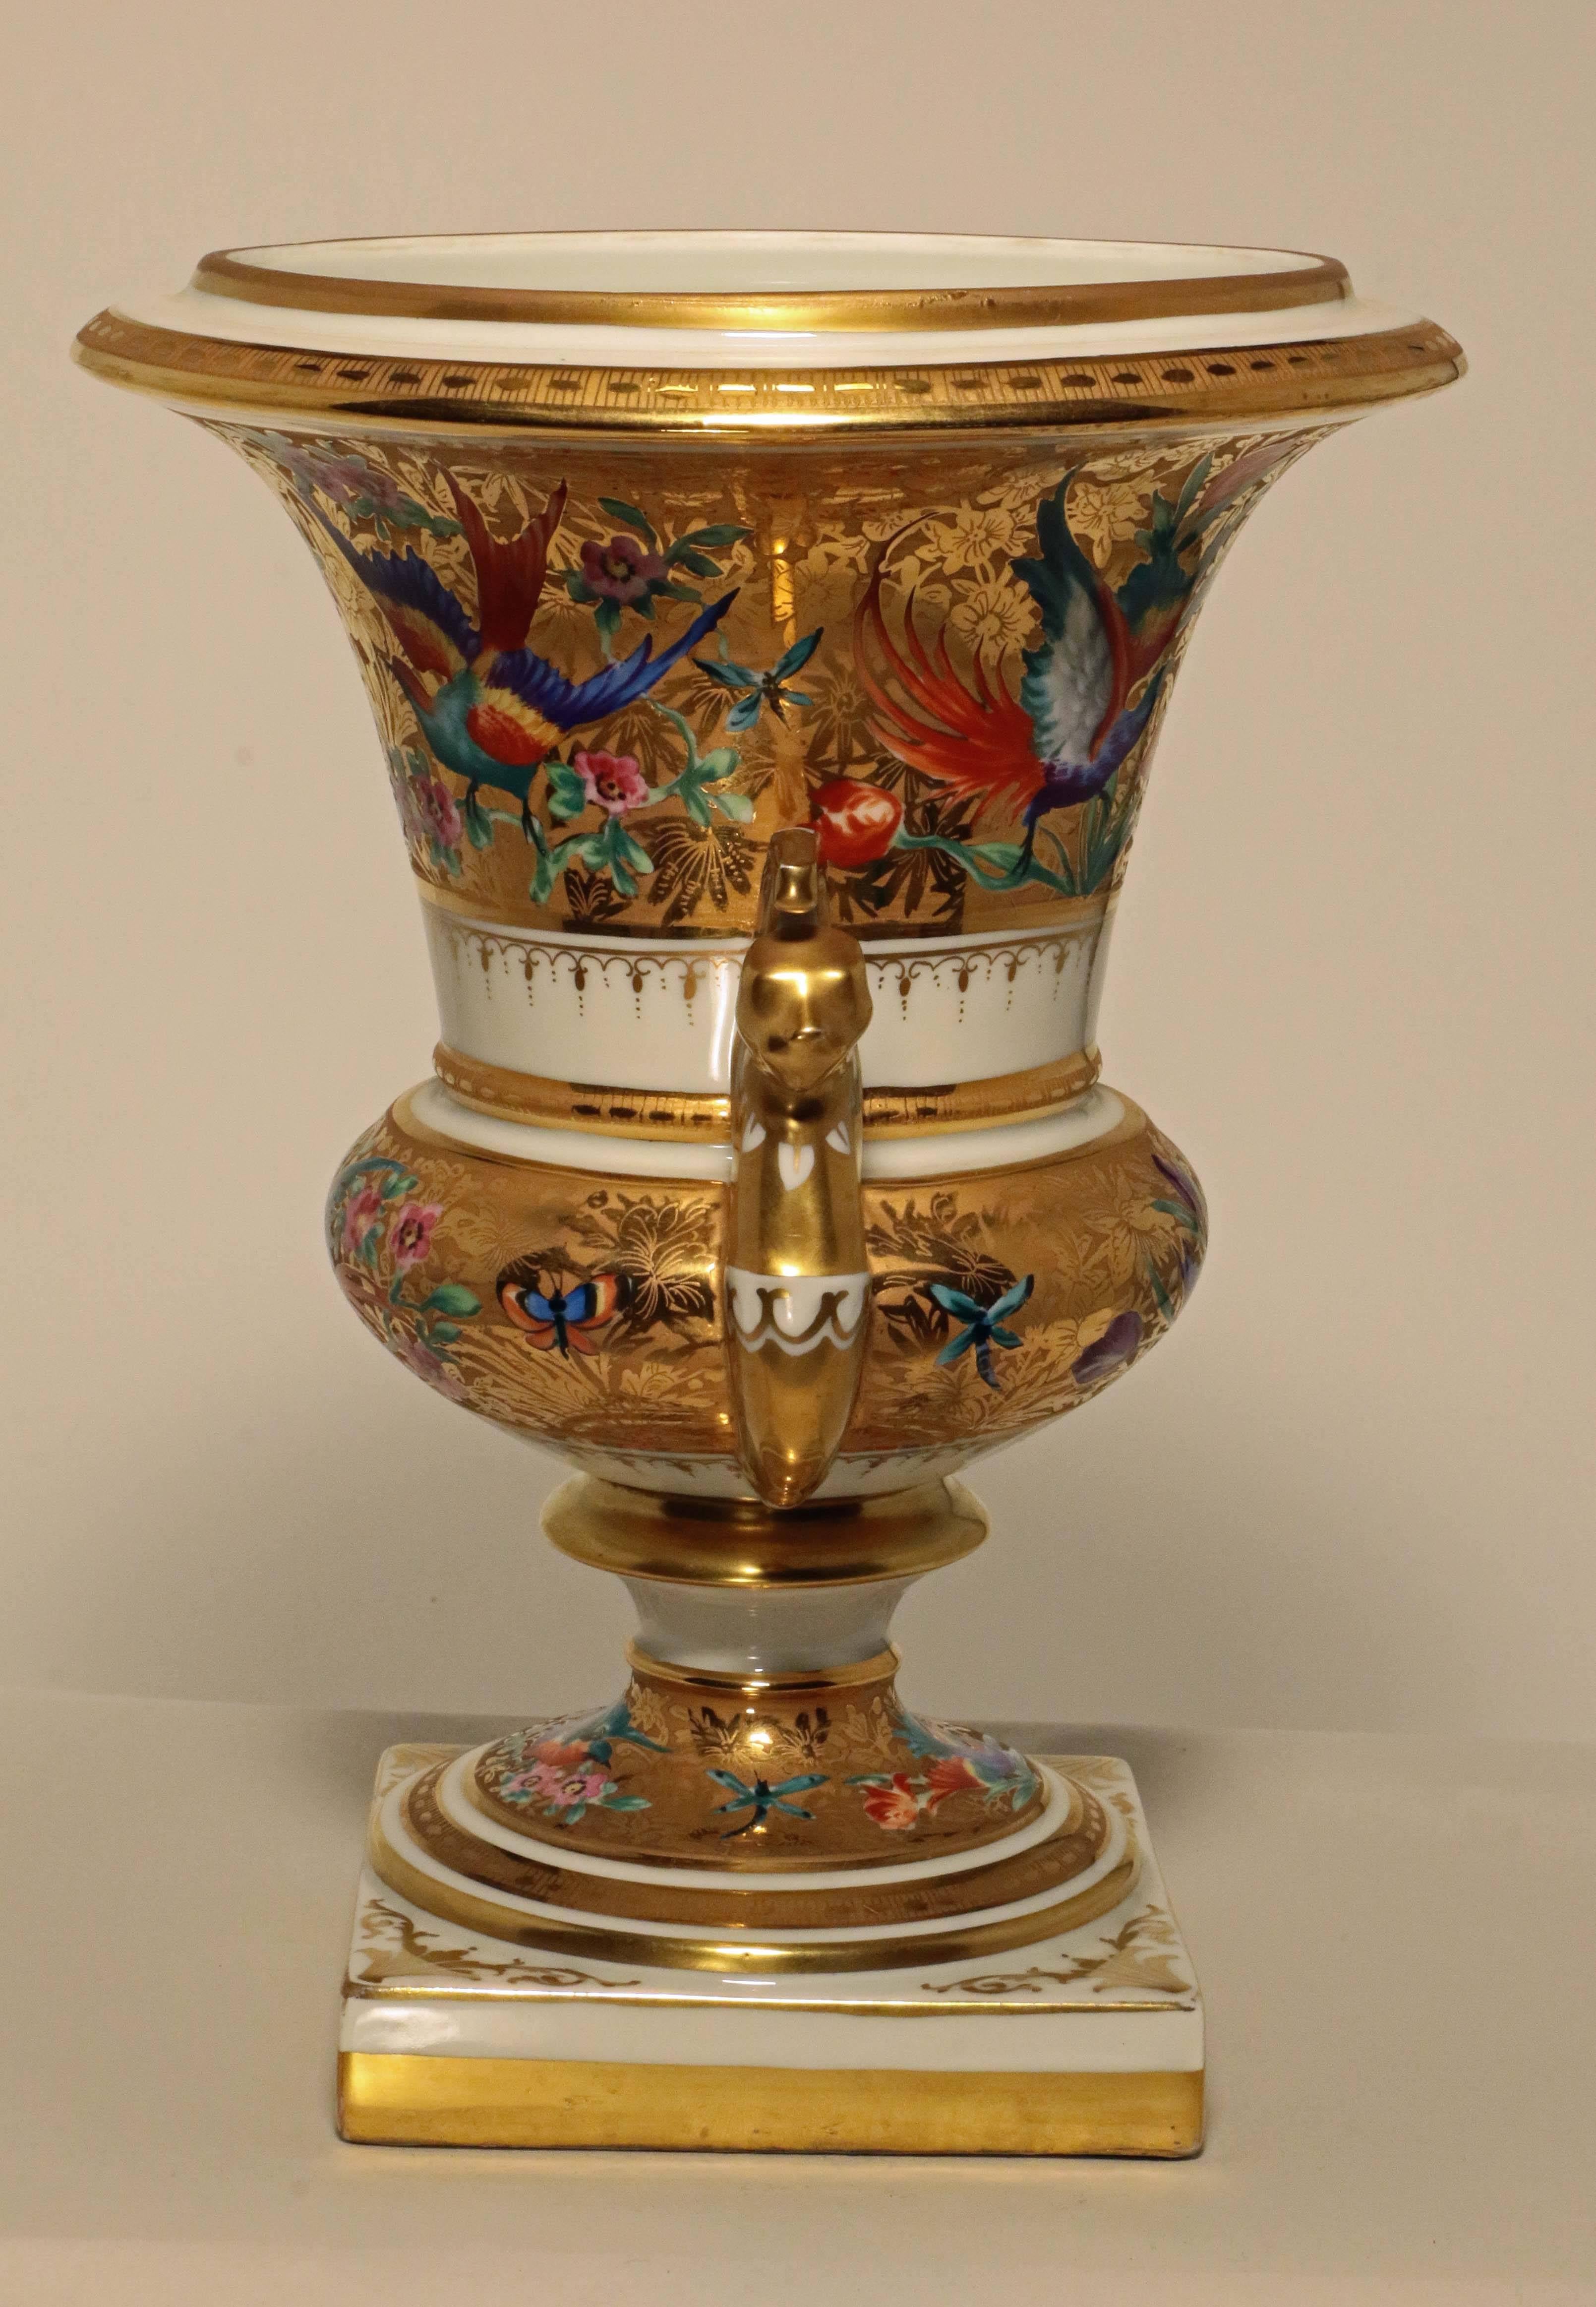 20th Century Pair of Paris Empire Style Porcelain Urns, Painted and Gilt